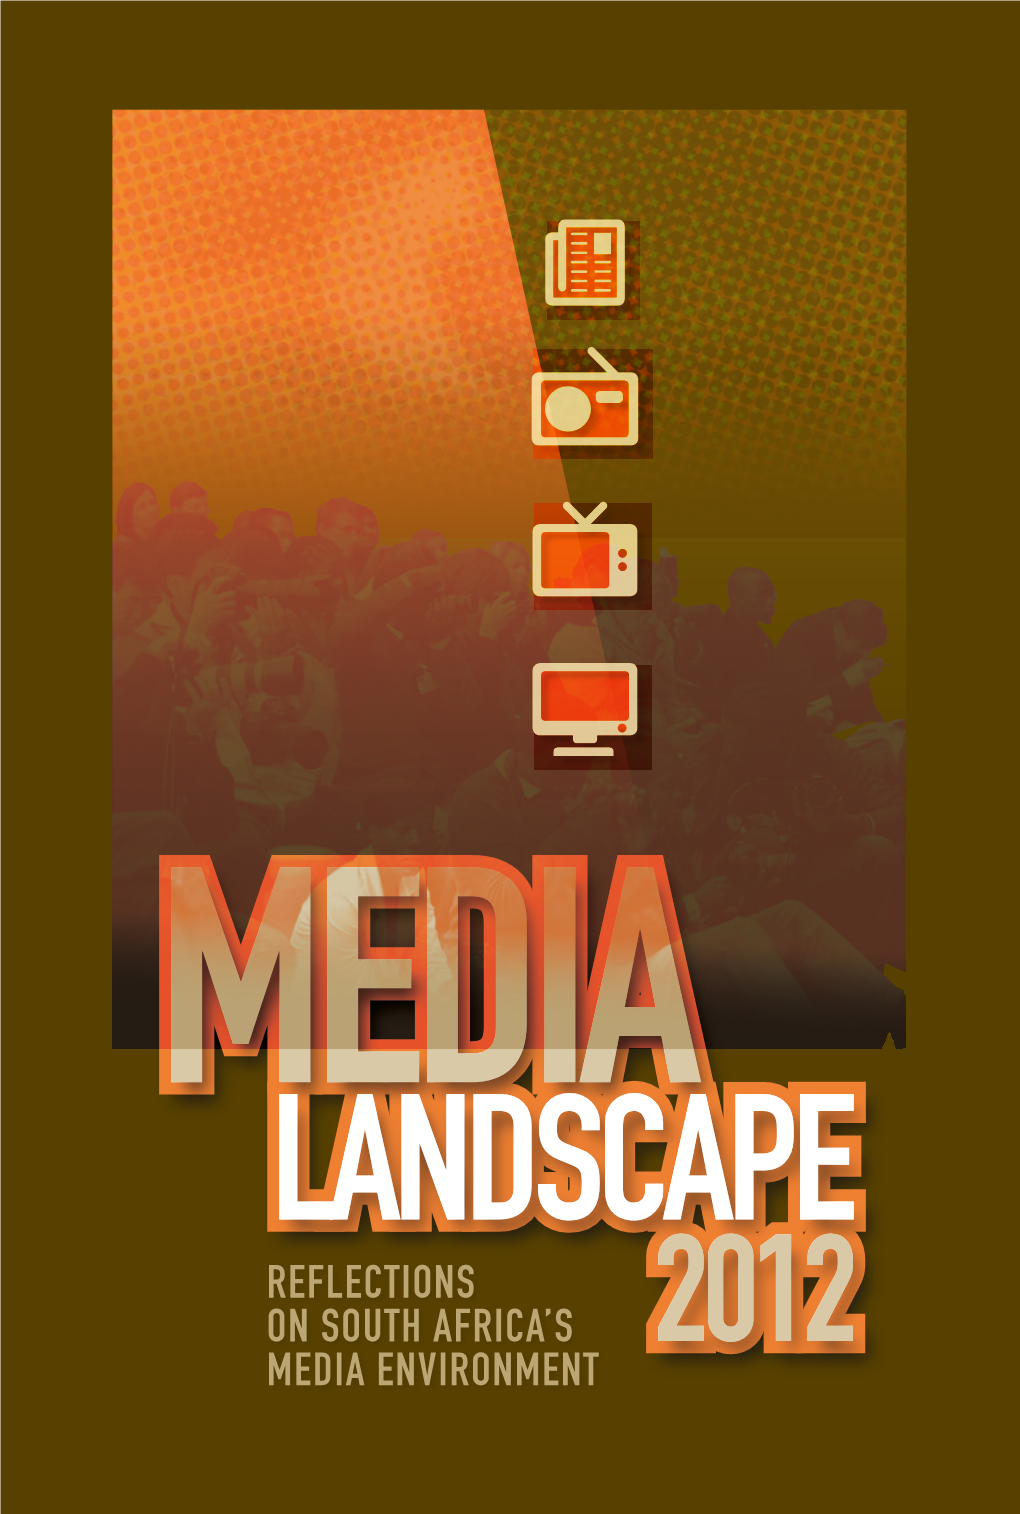 Media Landscape 2012: Reflections on South Africa's Media Environment